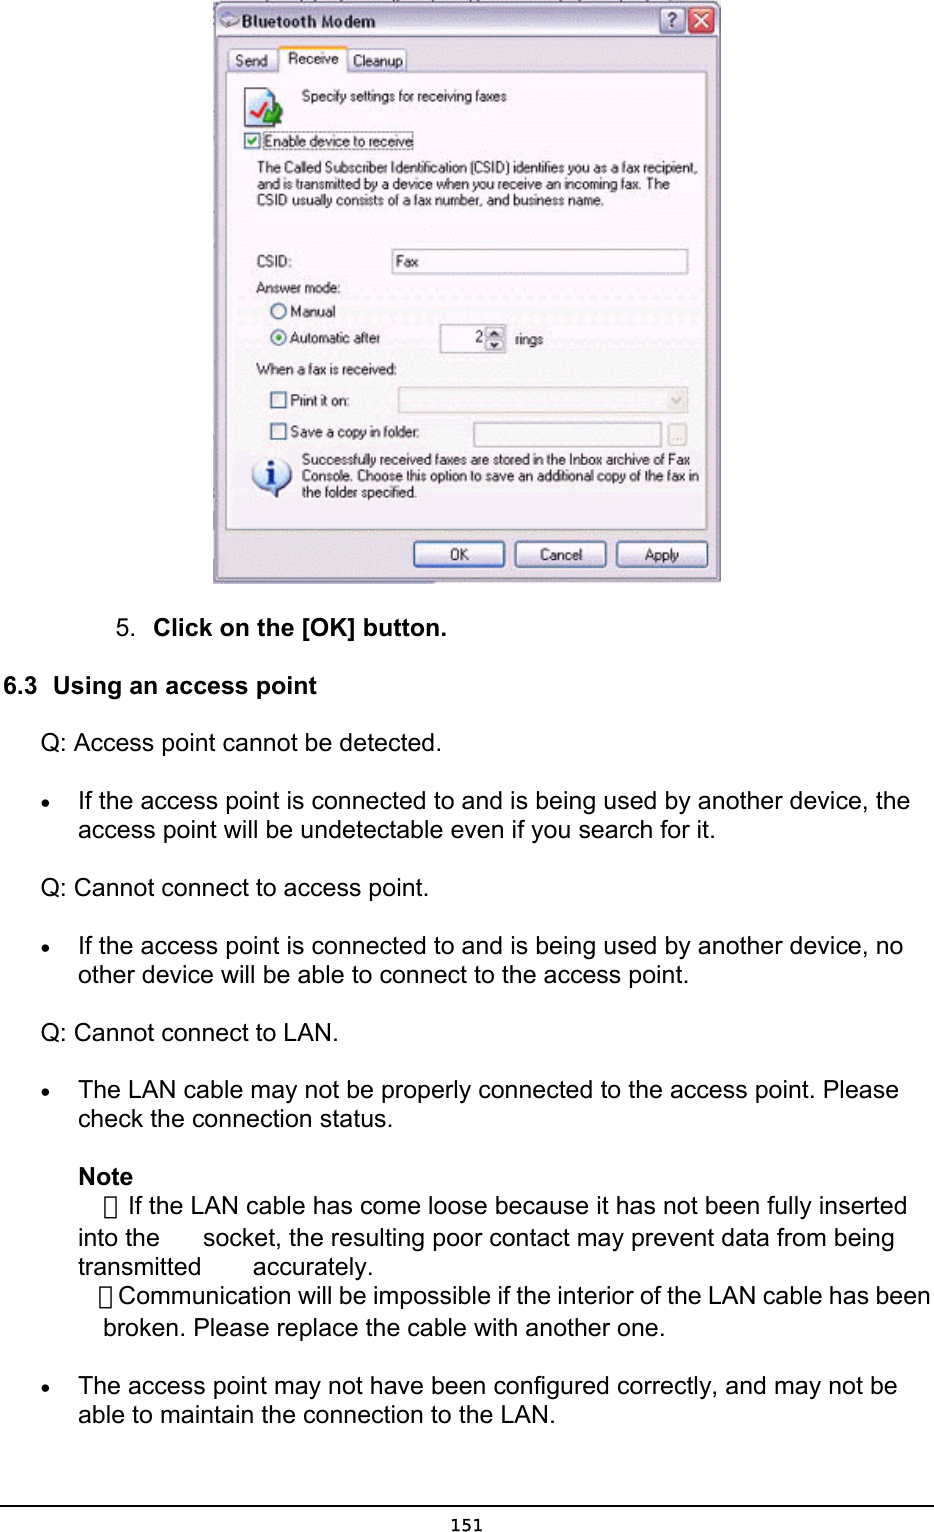   5.  Click on the [OK] button. 6.3  Using an access point Q: Access point cannot be detected. •  If the access point is connected to and is being used by another device, the access point will be undetectable even if you search for it. Q: Cannot connect to access point. •  If the access point is connected to and is being used by another device, no other device will be able to connect to the access point. Q: Cannot connect to LAN. •  The LAN cable may not be properly connected to the access point. Please check the connection status.   Note  ．If the LAN cable has come loose because it has not been fully inserted into the    socket, the resulting poor contact may prevent data from being transmitted   accurately.  ．Communication will be impossible if the interior of the LAN cable has been   broken. Please replace the cable with another one. •  The access point may not have been configured correctly, and may not be able to maintain the connection to the LAN.  151